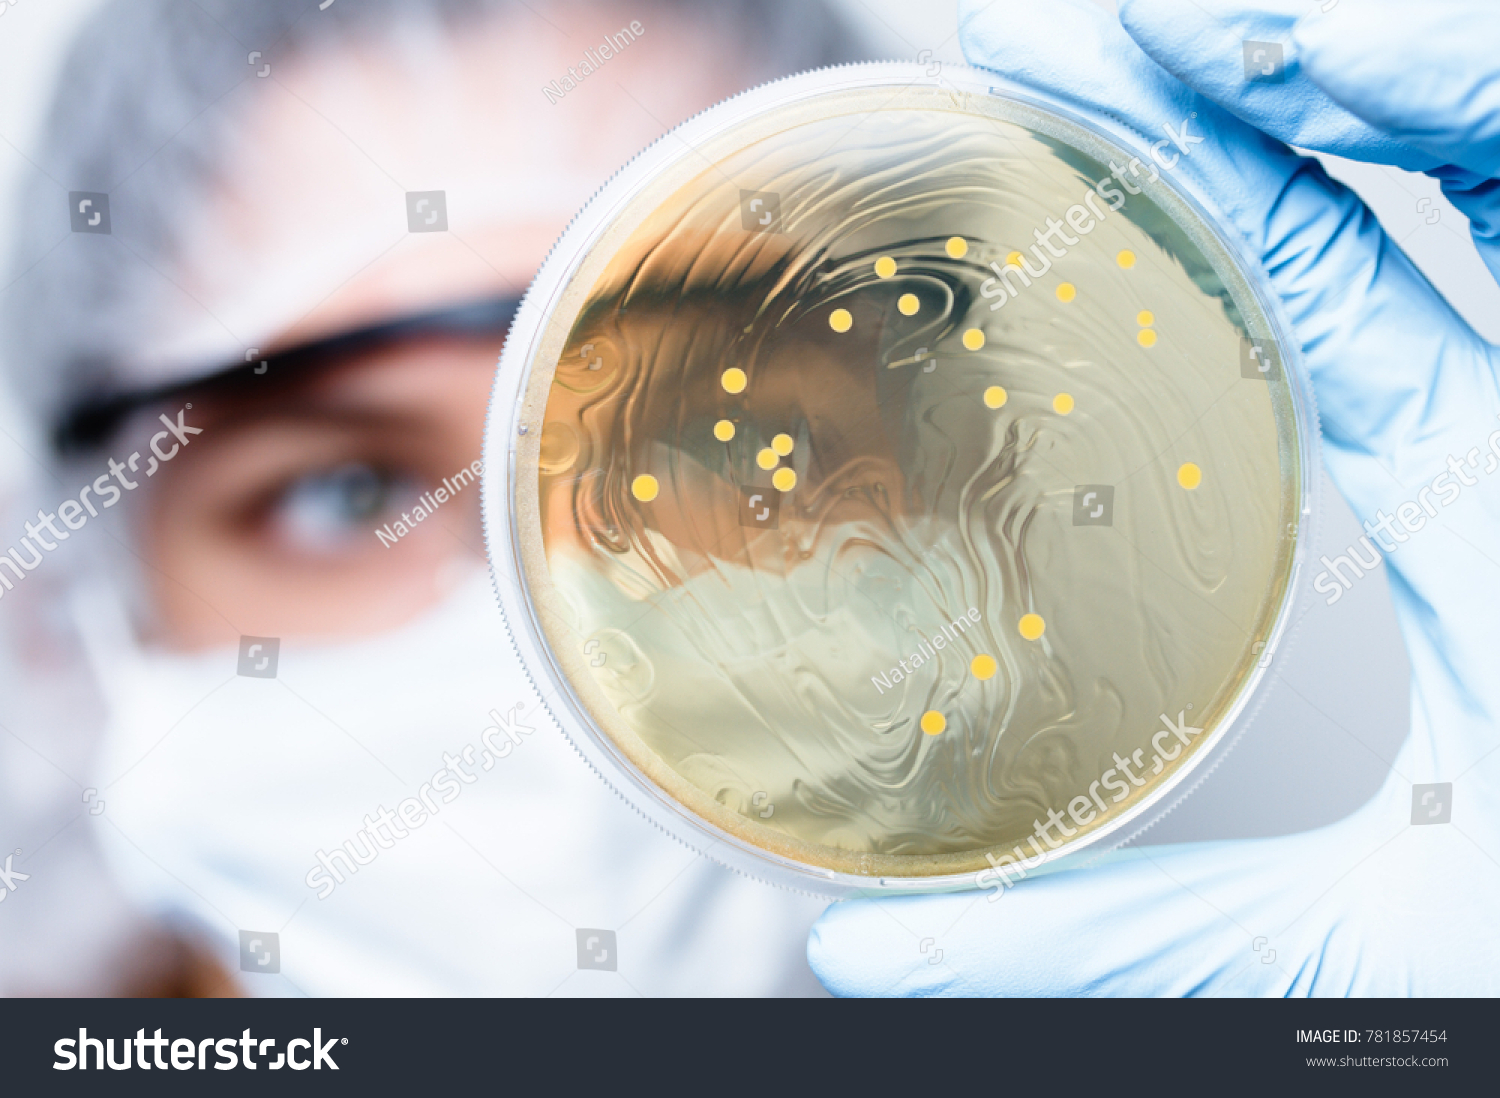 Lactobacillus bacteria colonies. Female US high school student (16 y.o.) is holding a Petri dish that contains Gram-positive lactobacillus bacteria grown on agar as part of a science project. #781857454